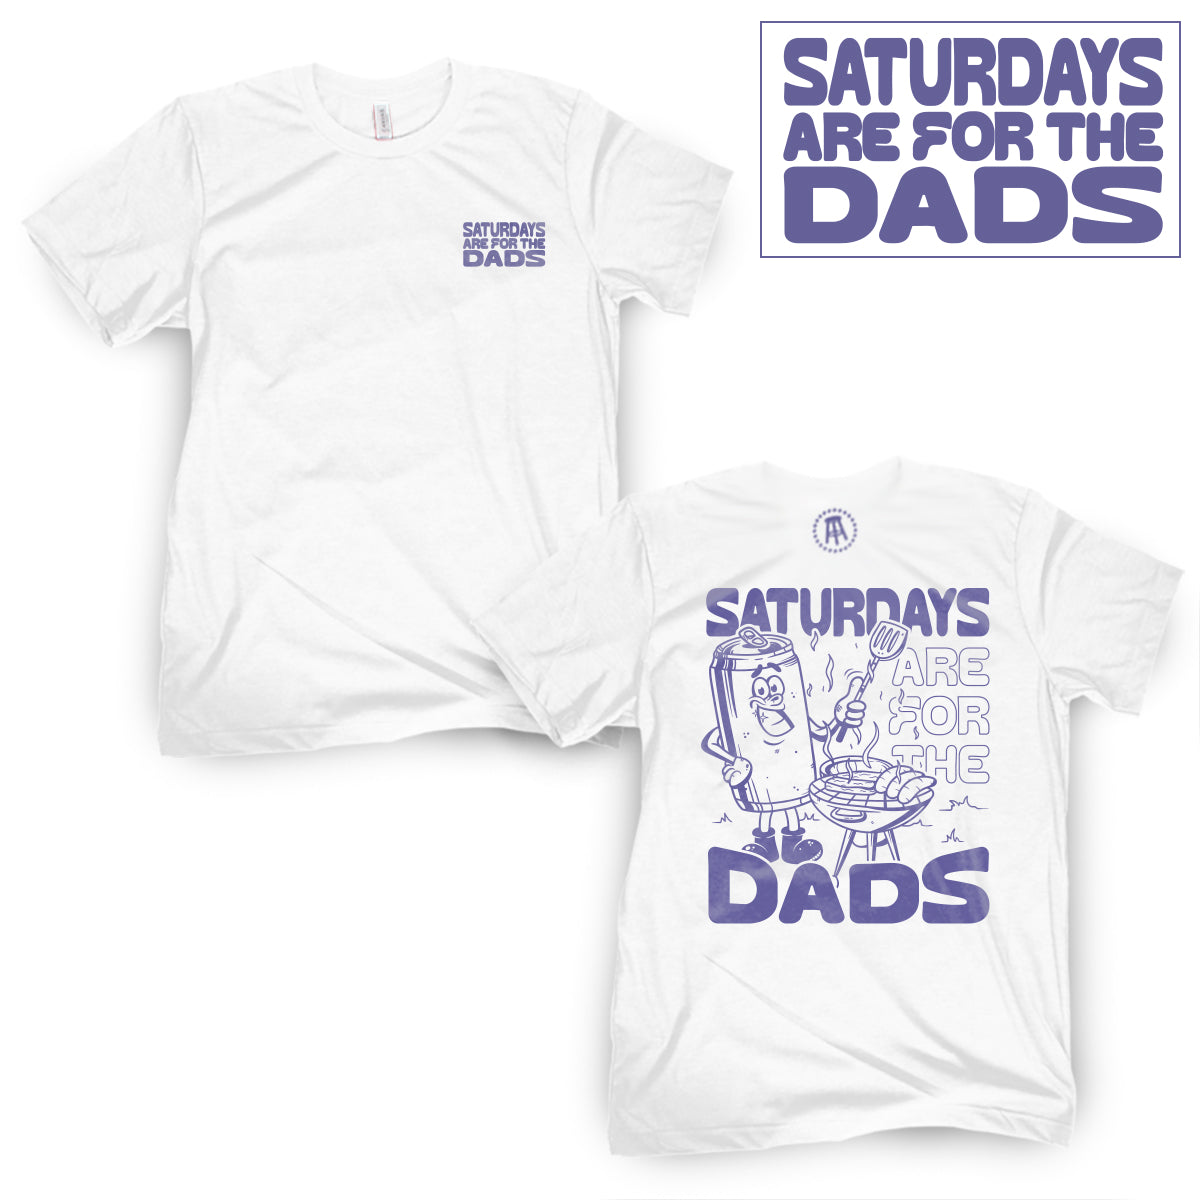 SAFTB Saturdays Are for The Dads Grill Tee II Yellow